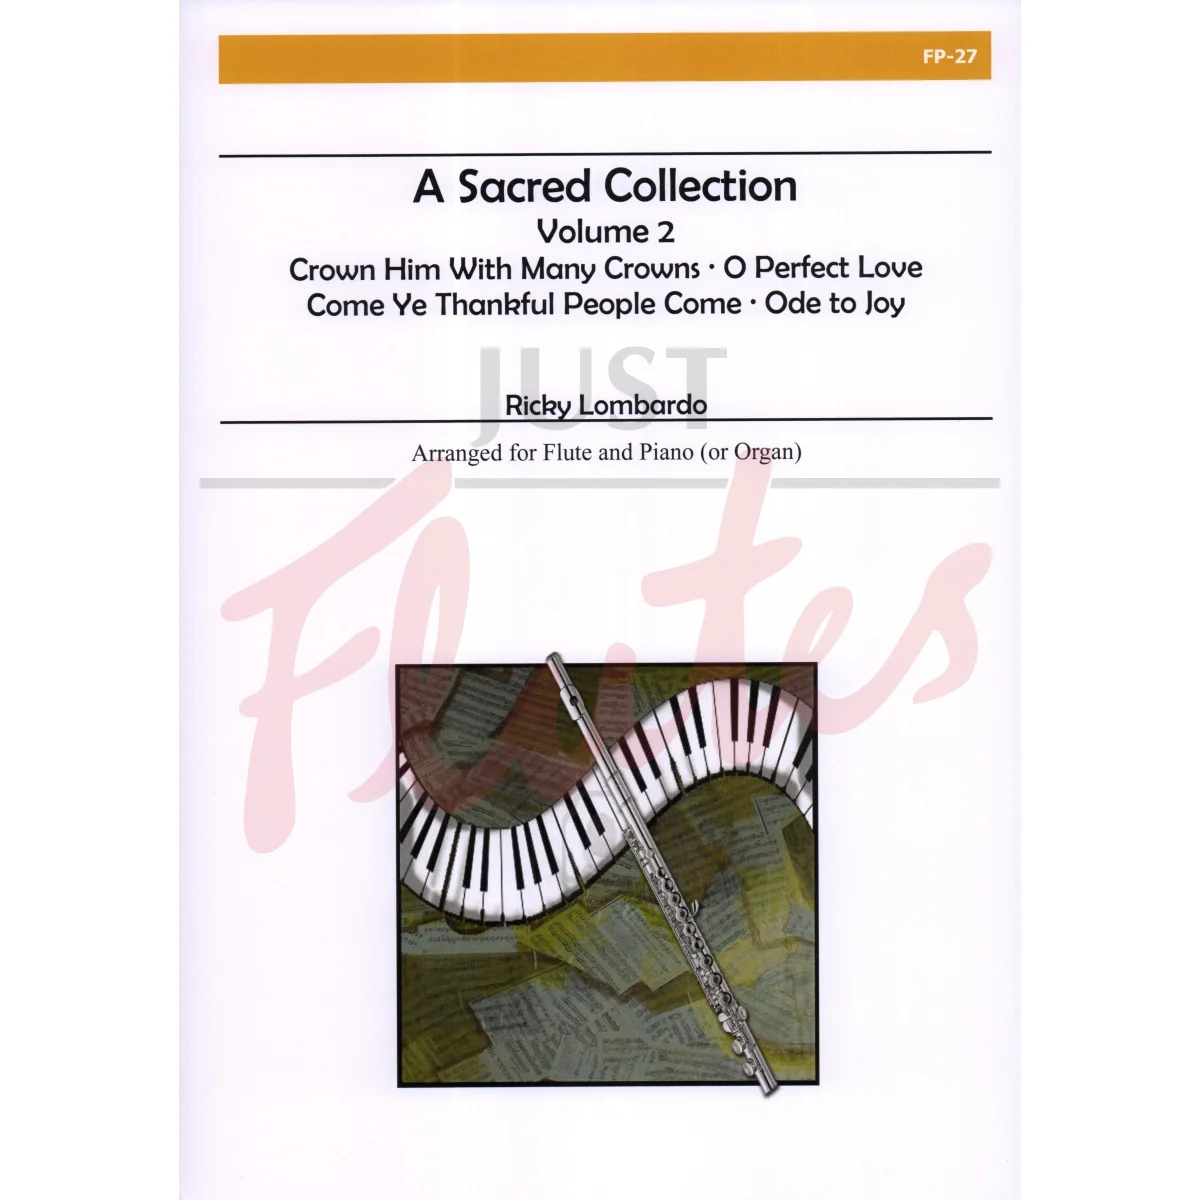 A Sacred Collection for Flute and Piano (or Organ), Vol 2